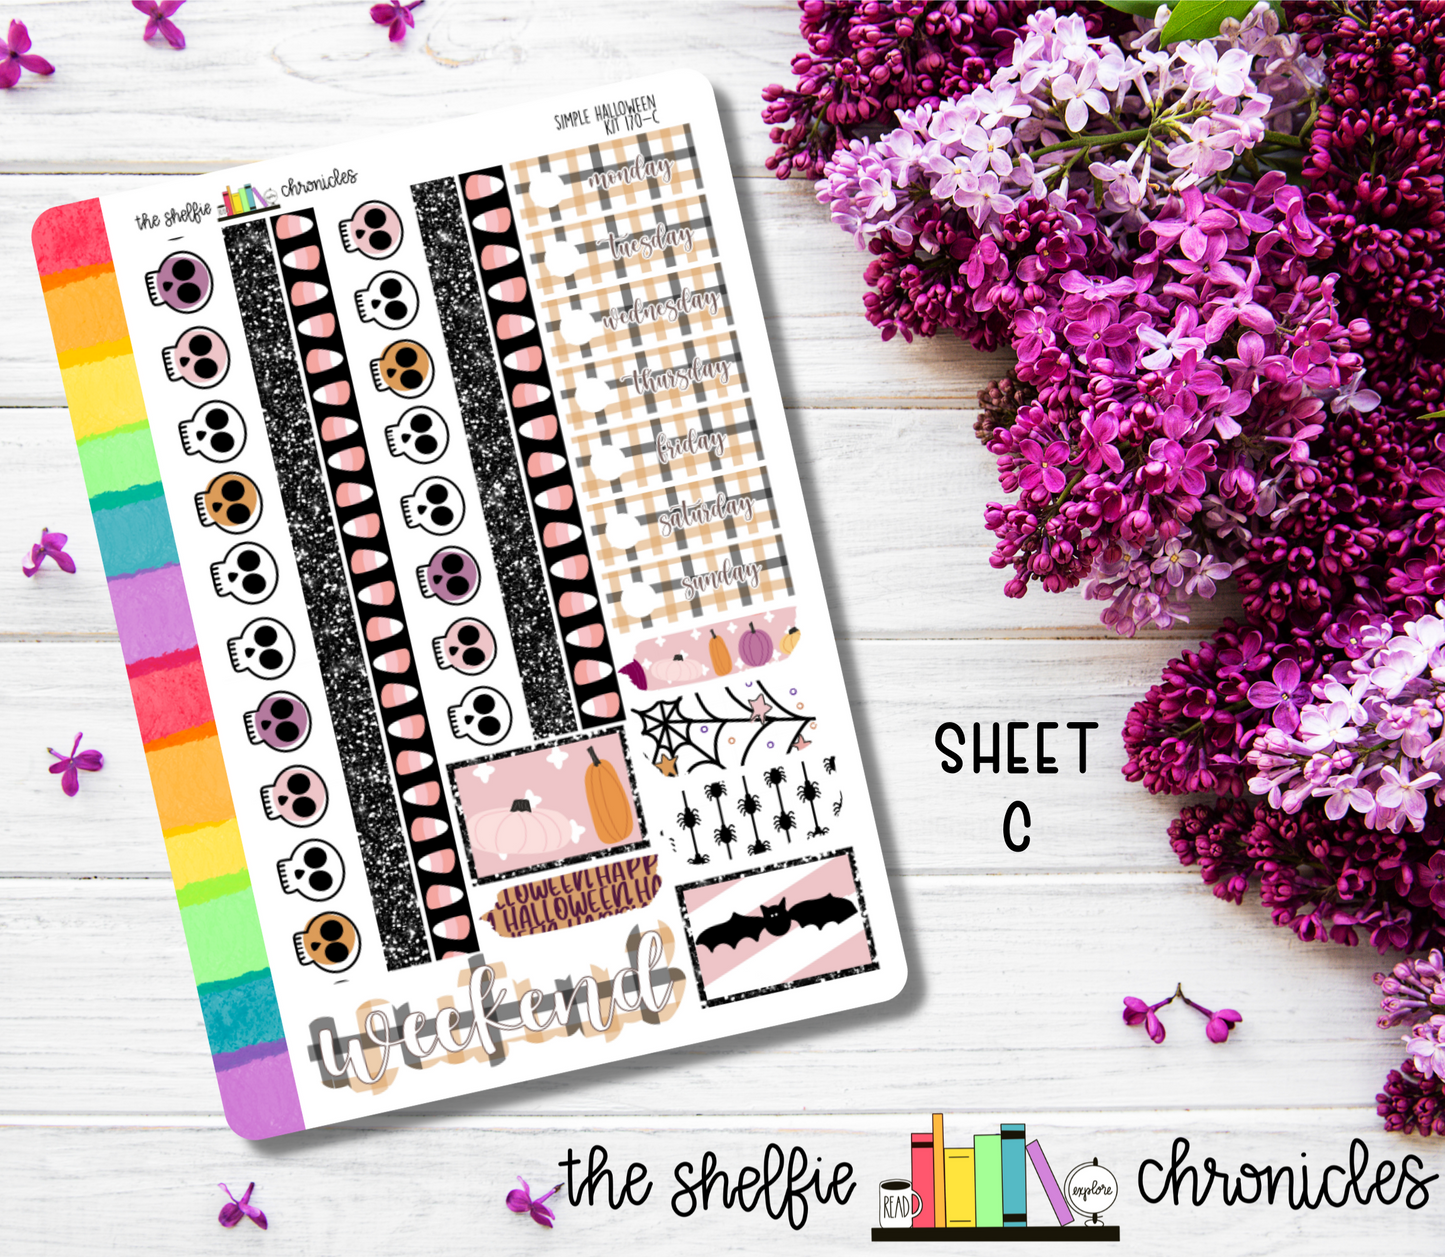 Kit 170 - Simple Halloween Weekly Kit - Die Cut Stickers - Repositionable Paper - Made To Fit 7x9 Planners